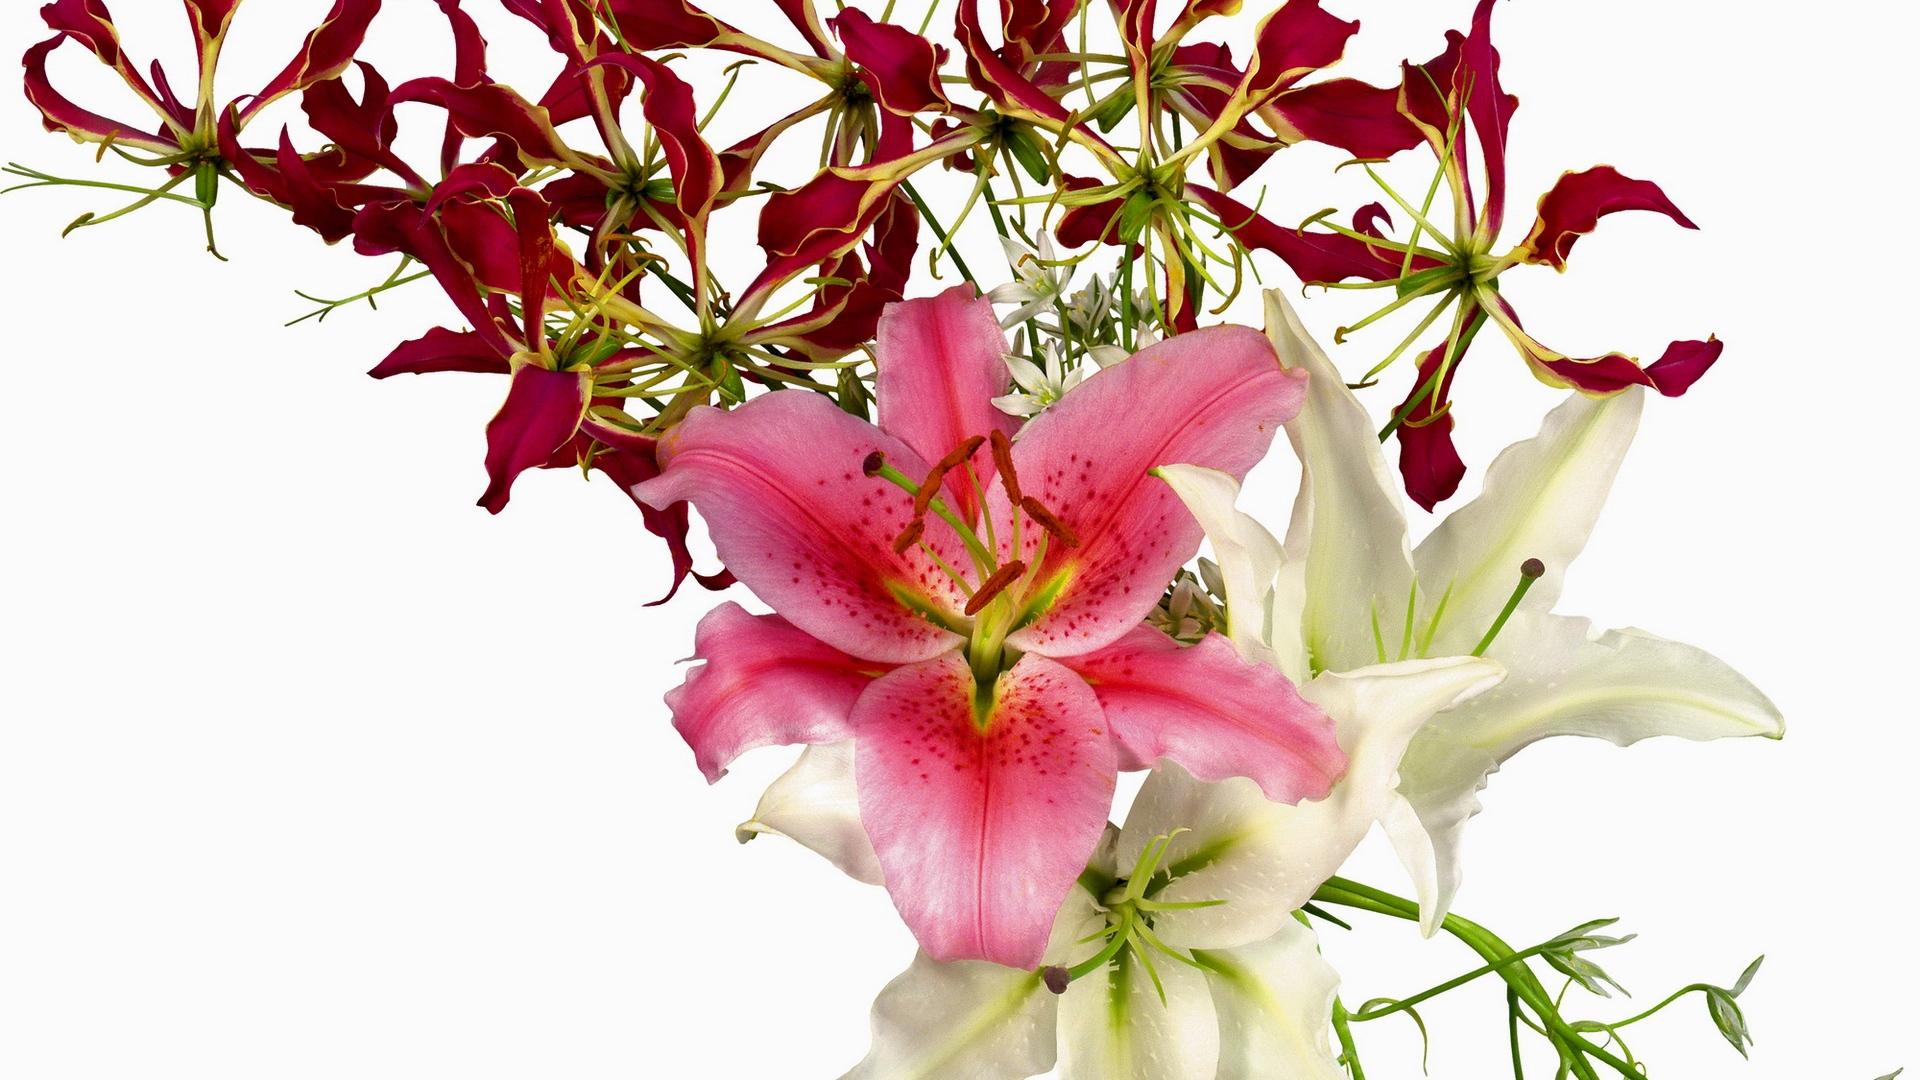 Background White and Lilies Wallpaper